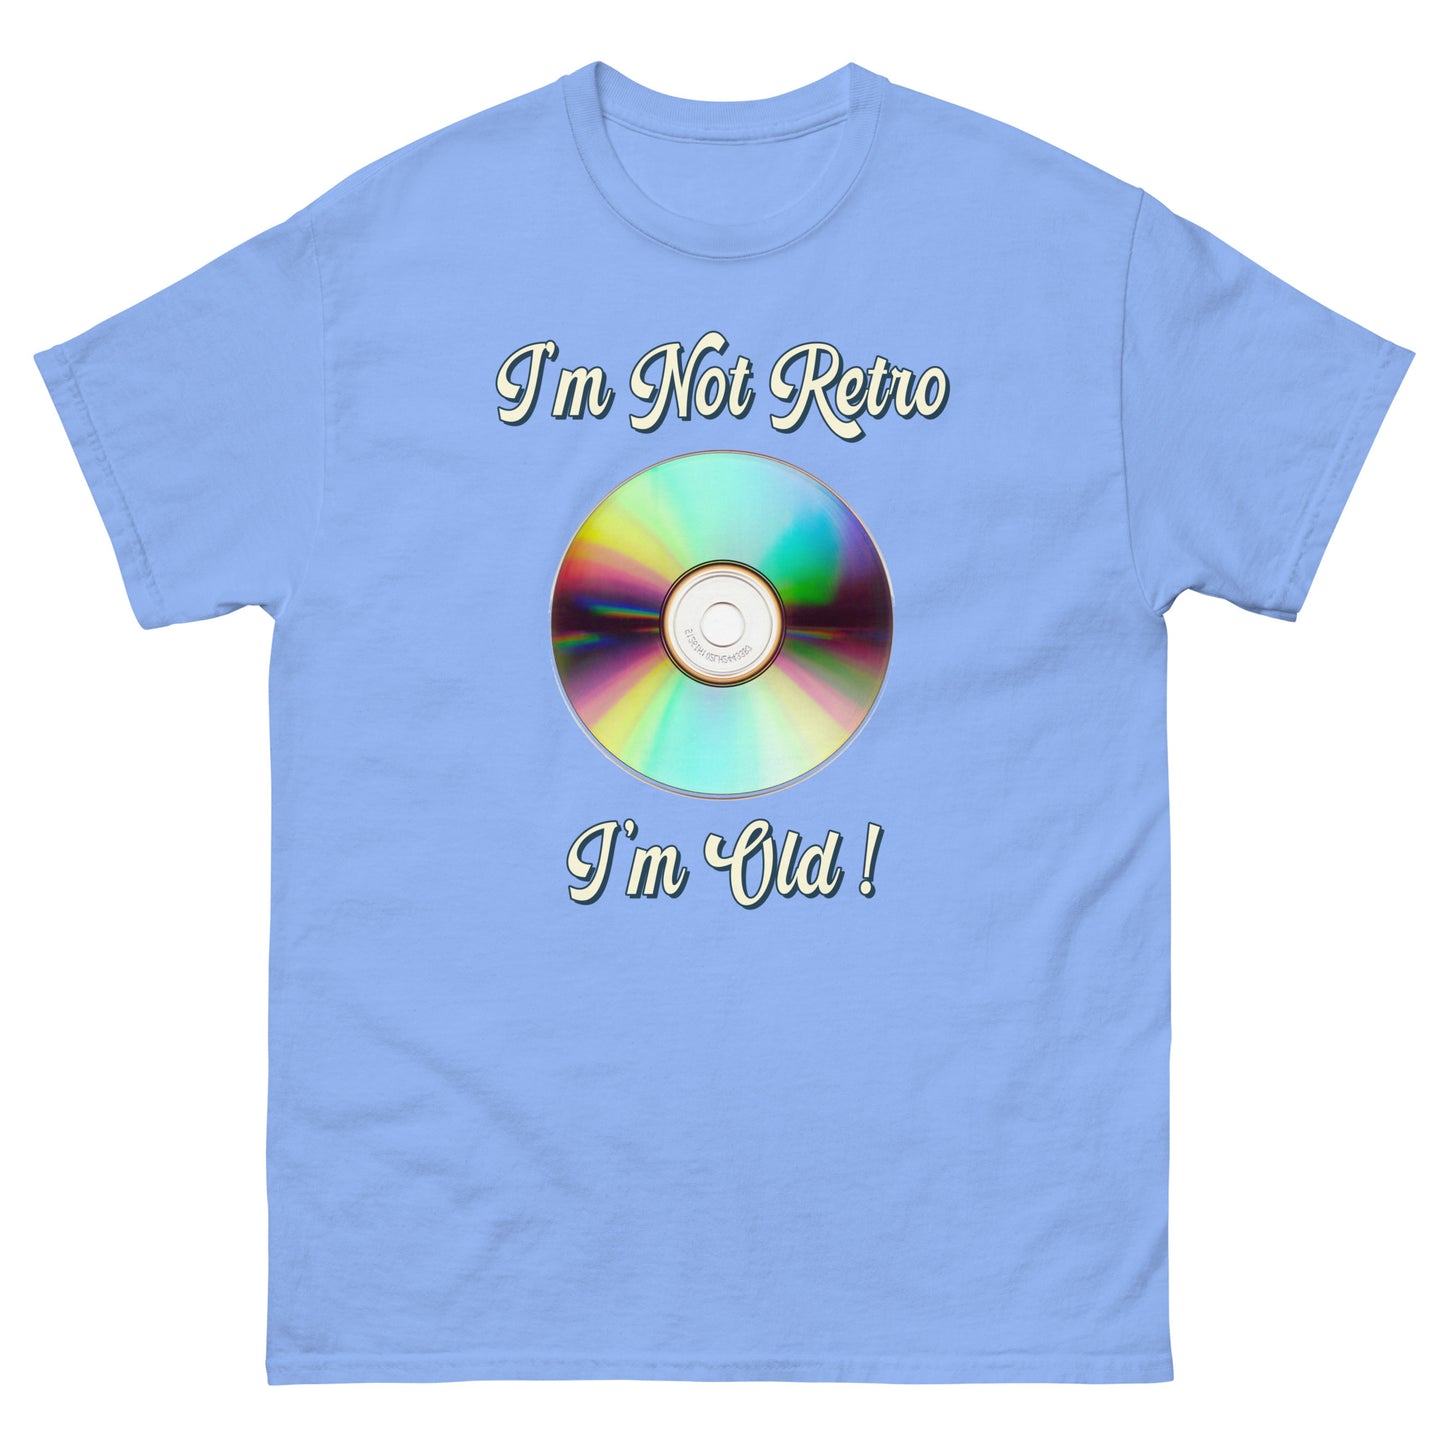 Im not retro I'm old with picture of a cd printed T-shirt by Whistler Shirts